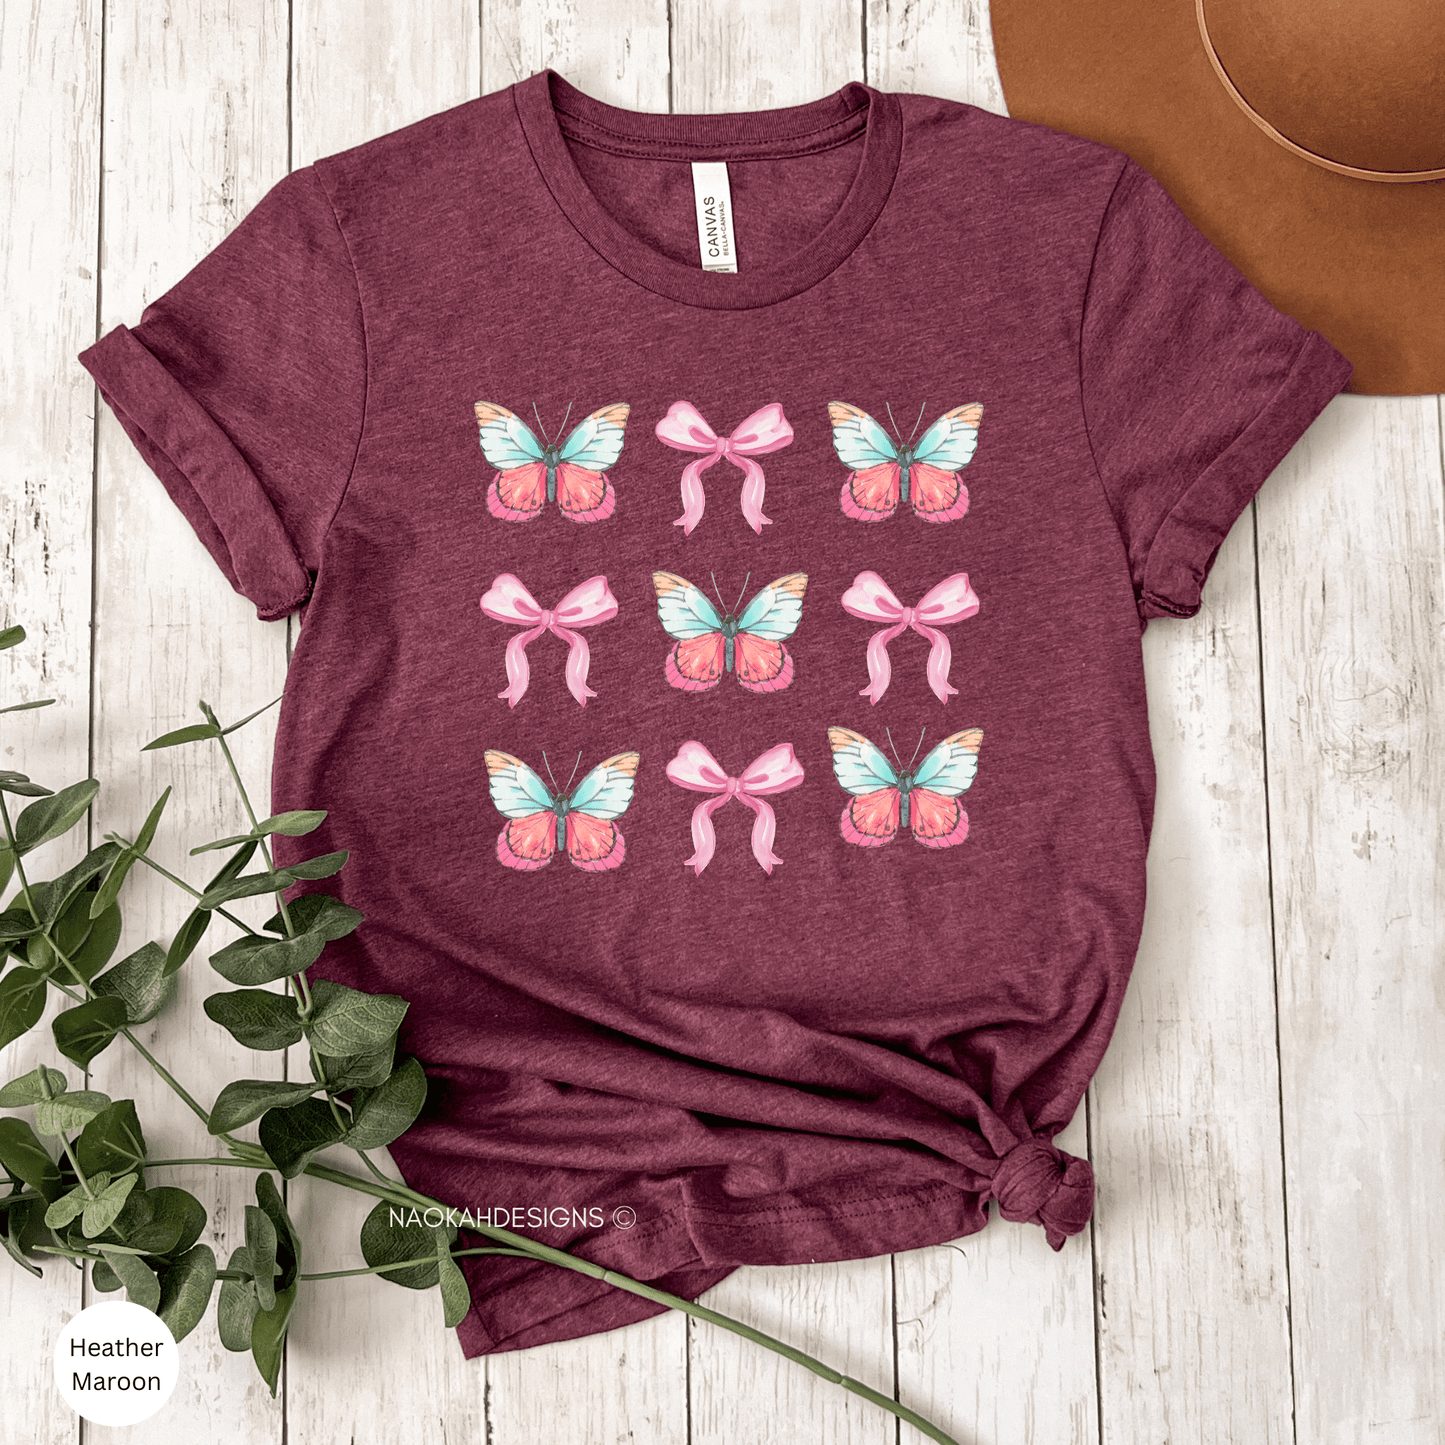 coquette butterfly and bows shirt, retro coquette aesthetic butterfly art shirt